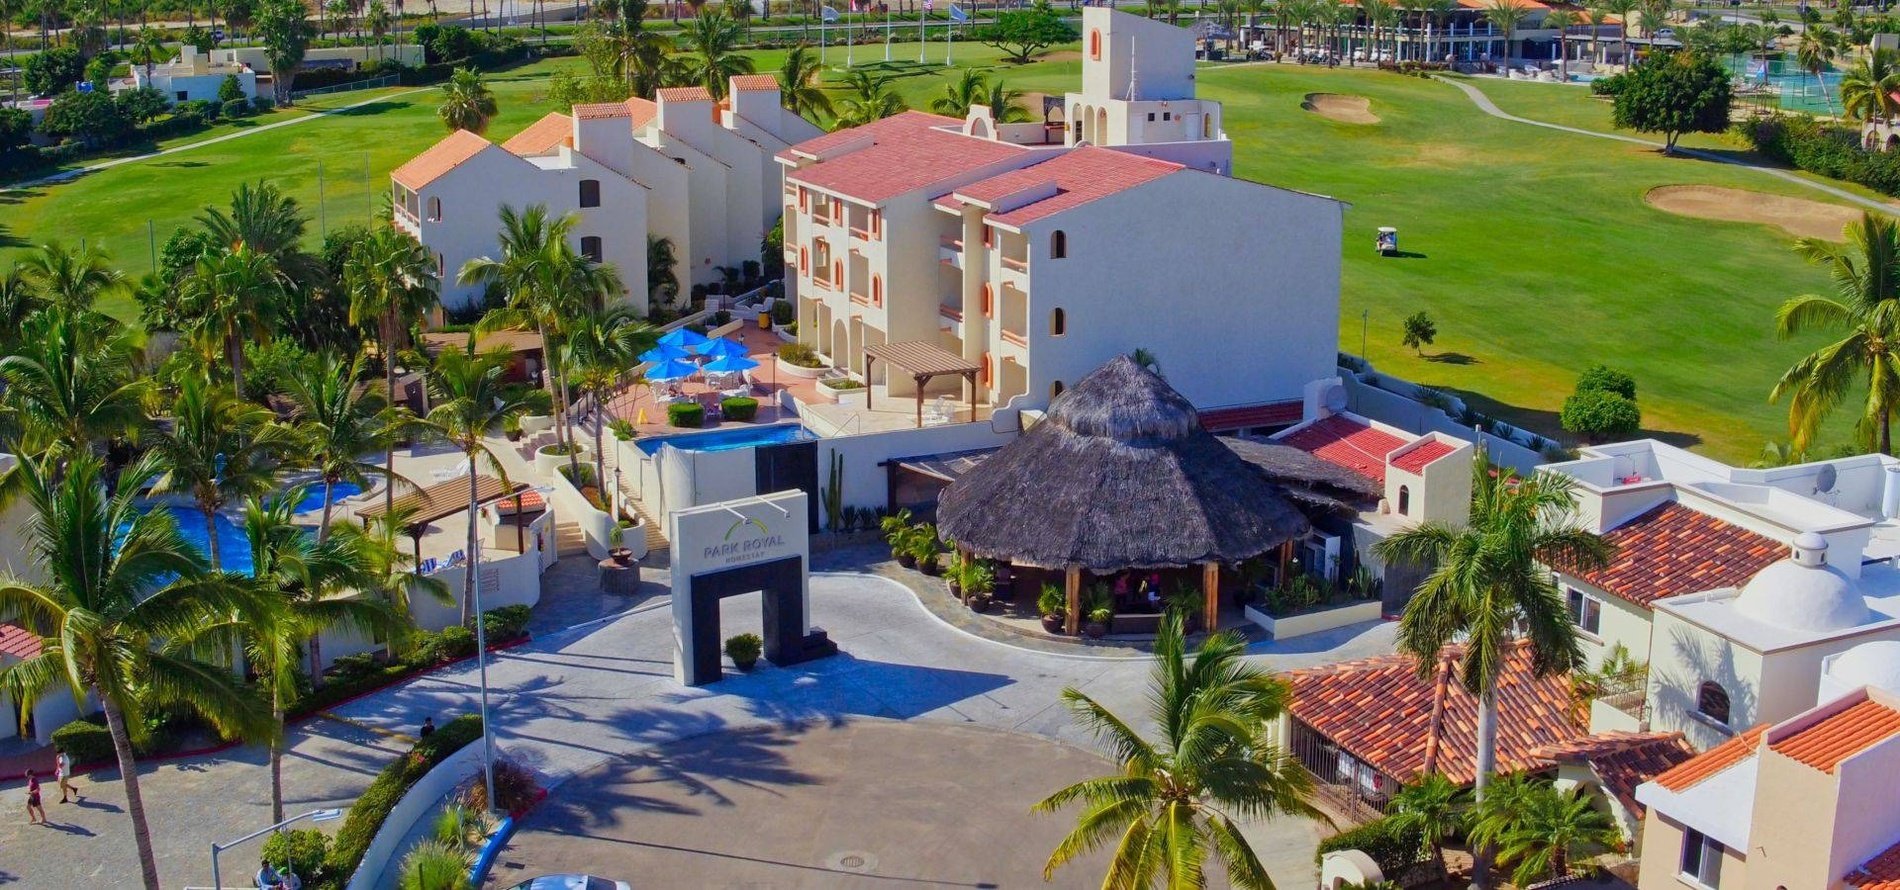 Panoramic view of the entrance and facilities of Homestay Los Cabos in Baja California Sur